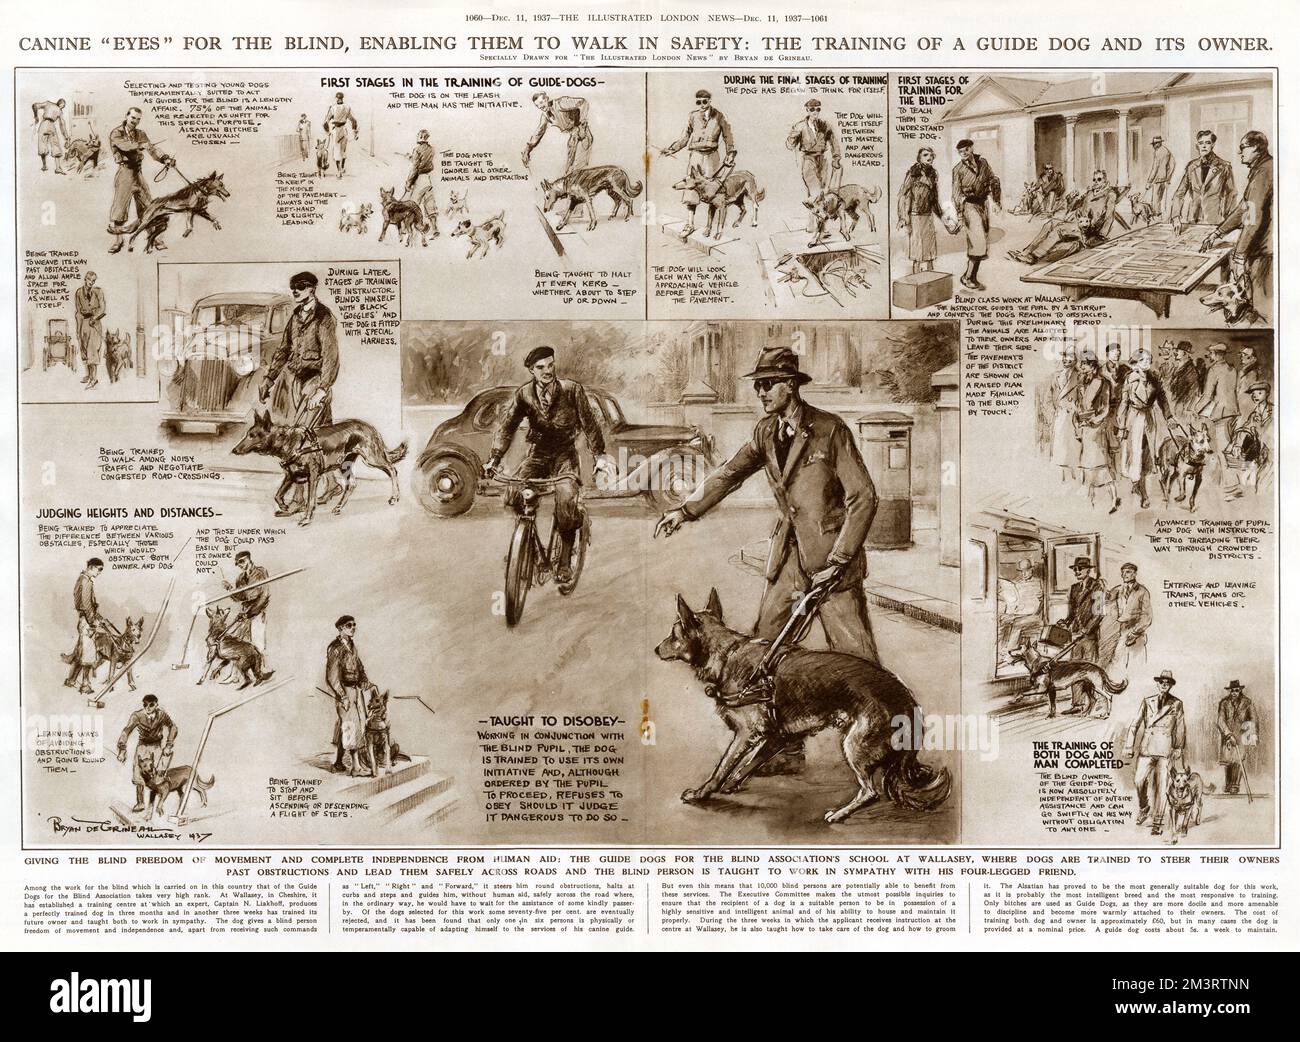 Illustration by Bryan de Grineau in The Illustrated London News showing stages of training a guide dog and its blind owner at the Guide Dogs for the Blind Association School in Wallasey.       Date: 1937 Stock Photo